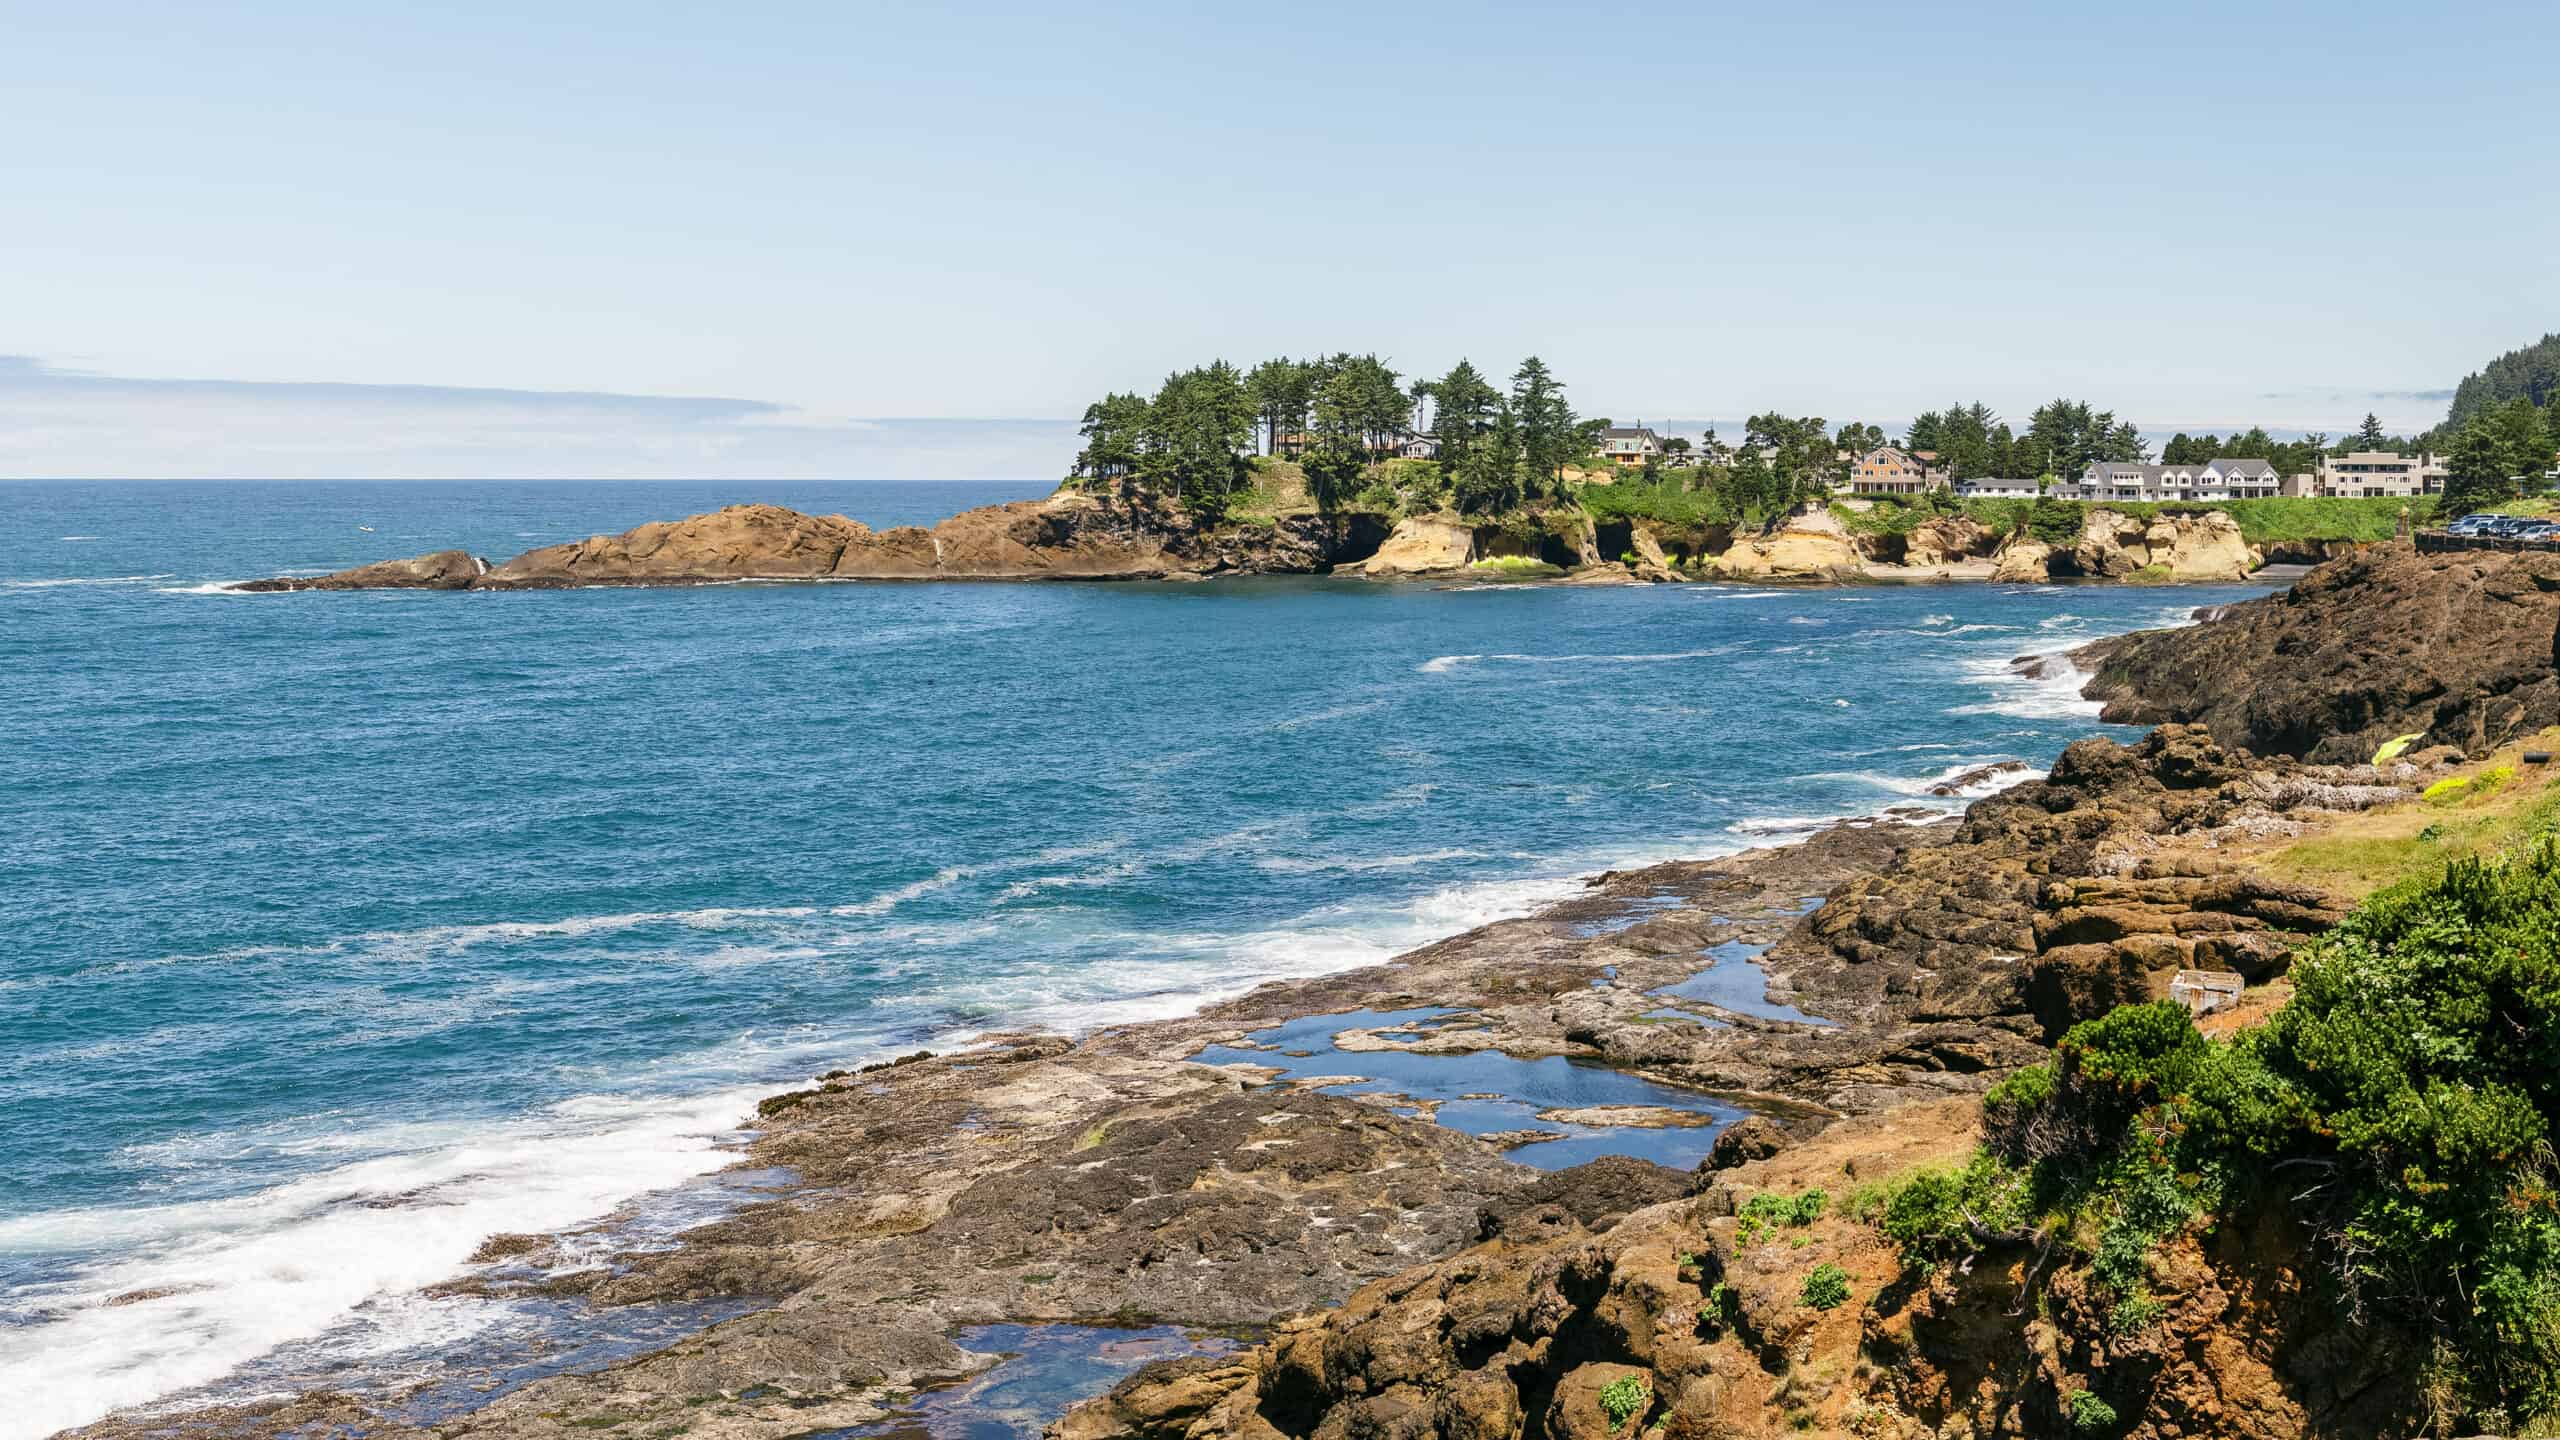 <p>Off the infamous coastal Highway 101 sits Depoe Bay. Depoe Bay is the world’s smallest navigable harbor, with only six acres of harbor. The small harbor was featured in several films, most notably in the fishing scene from Jack Nicholson’s film <em>One Flew Over the Cuckoo’s Nest</em>. The area’s other claim to fame is that it’s known as the Whale Watching Capital of the Oregon Coast, because gray whales are regularly spotted. Visitors can explore the beaches and tidepools at The Devil’s Punchbowl State Natural Area, or charter a fishing boat for a day on the water; these are just some of the fun things to do in Oregon’s Depoe Bay.</p>